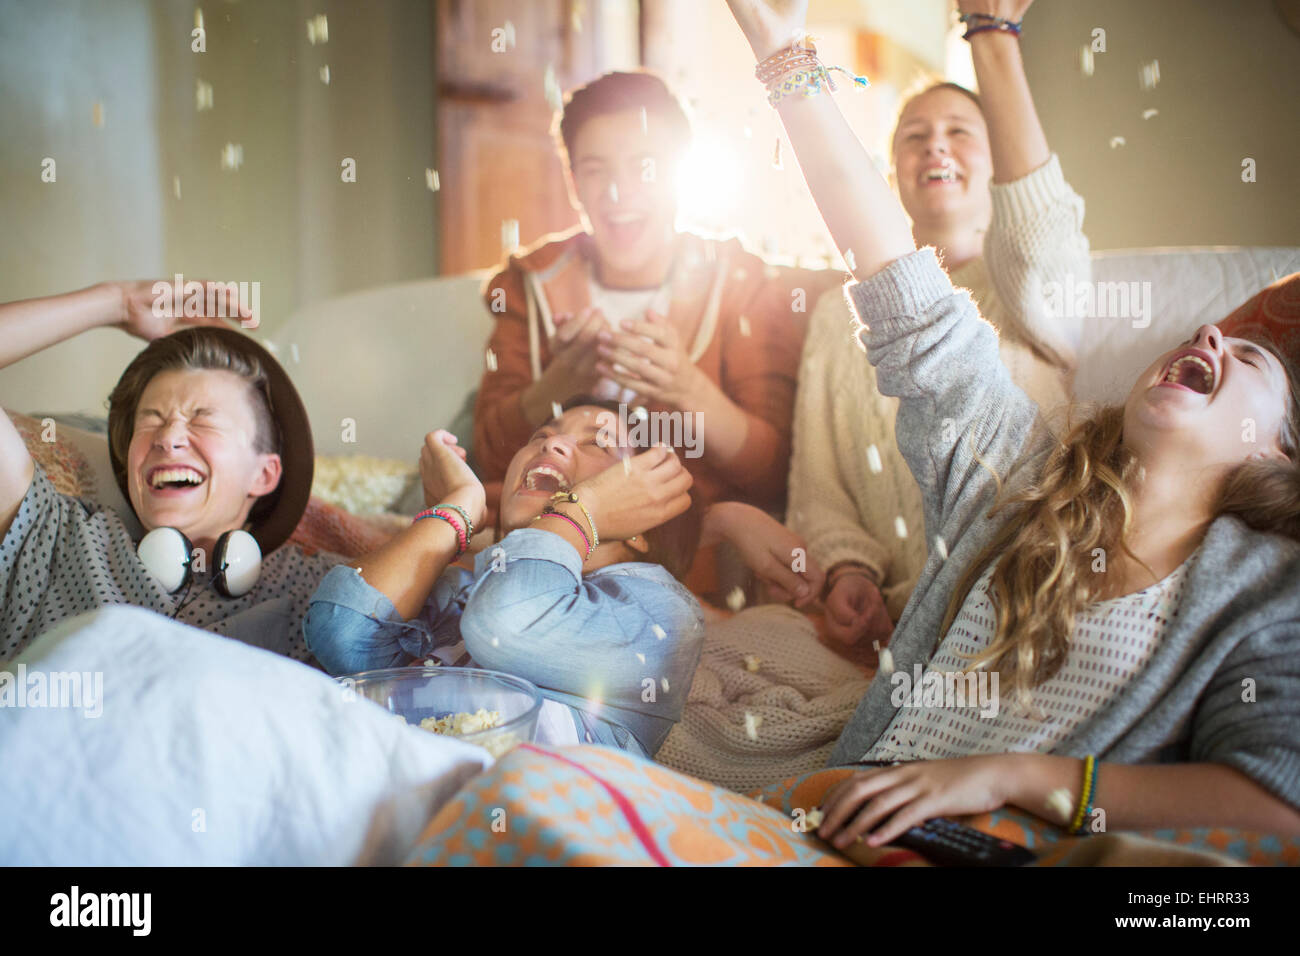 Group of teenagers throwing popcorn on themselves on sofa Stock Photo